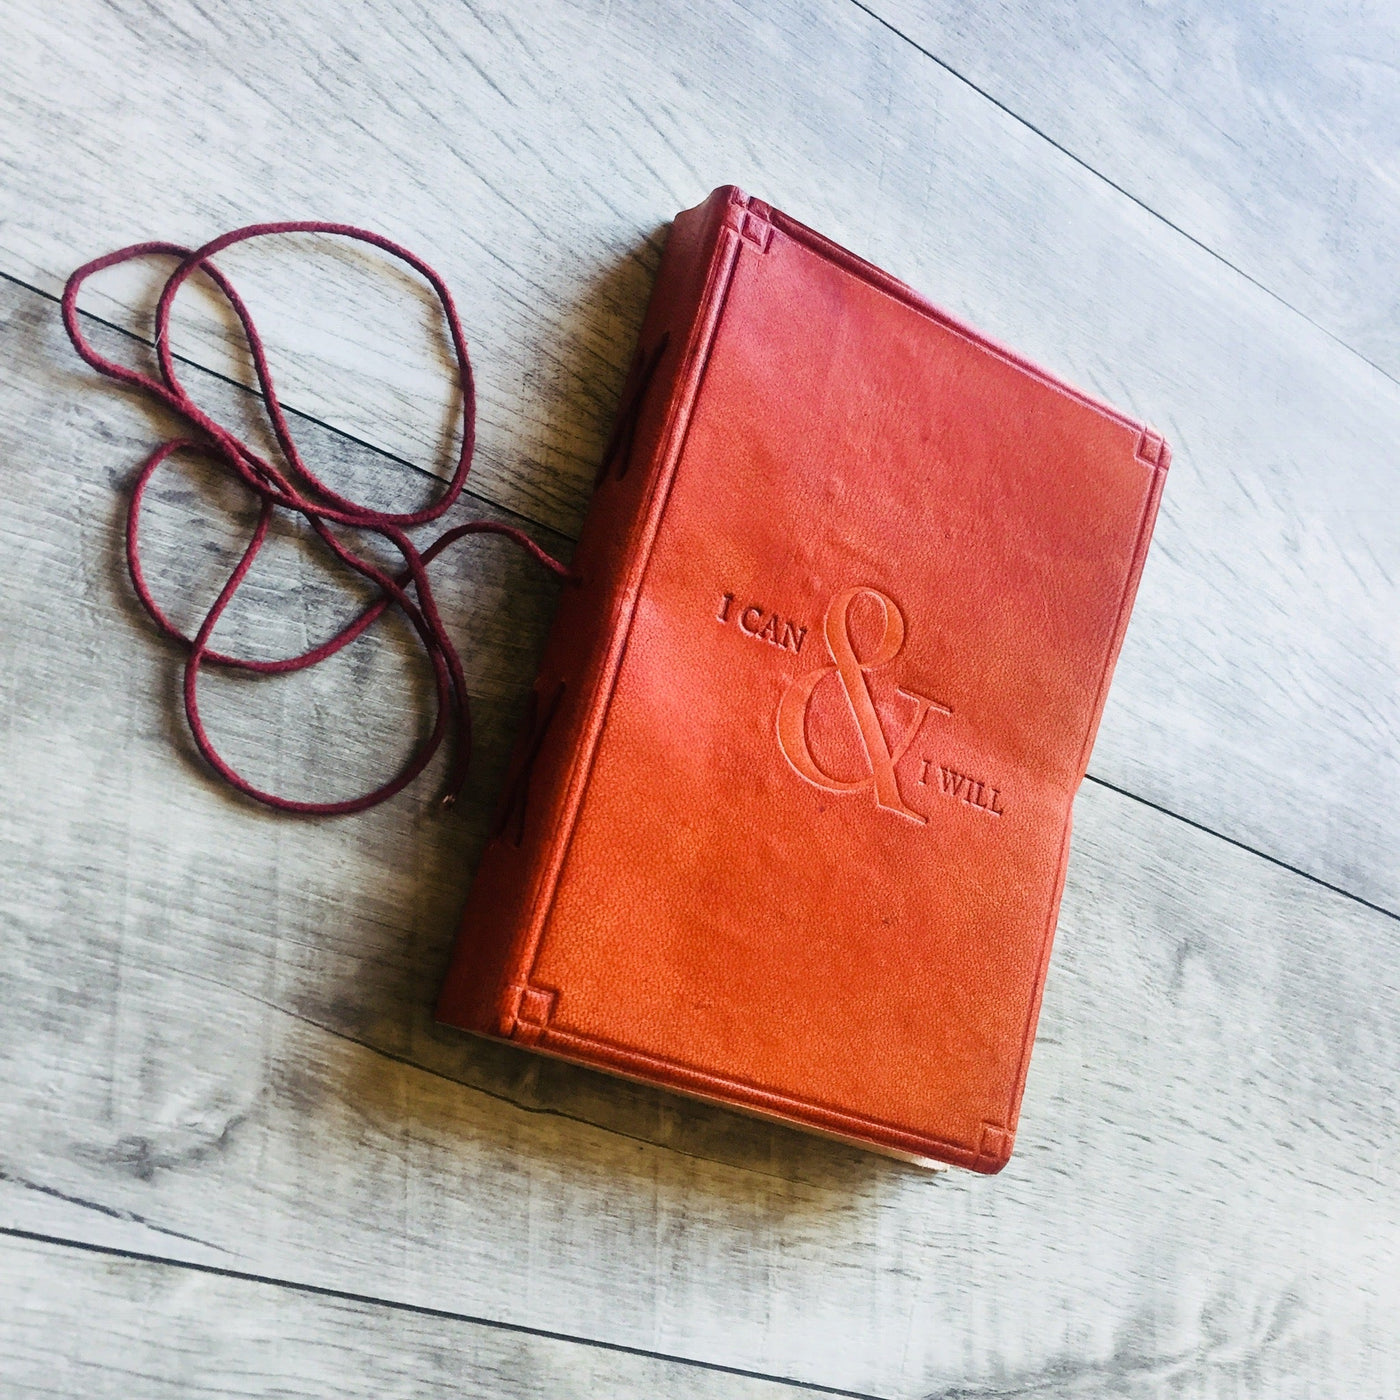 "I Can & I Will" Handmade Leather Journal - The Lake and Company